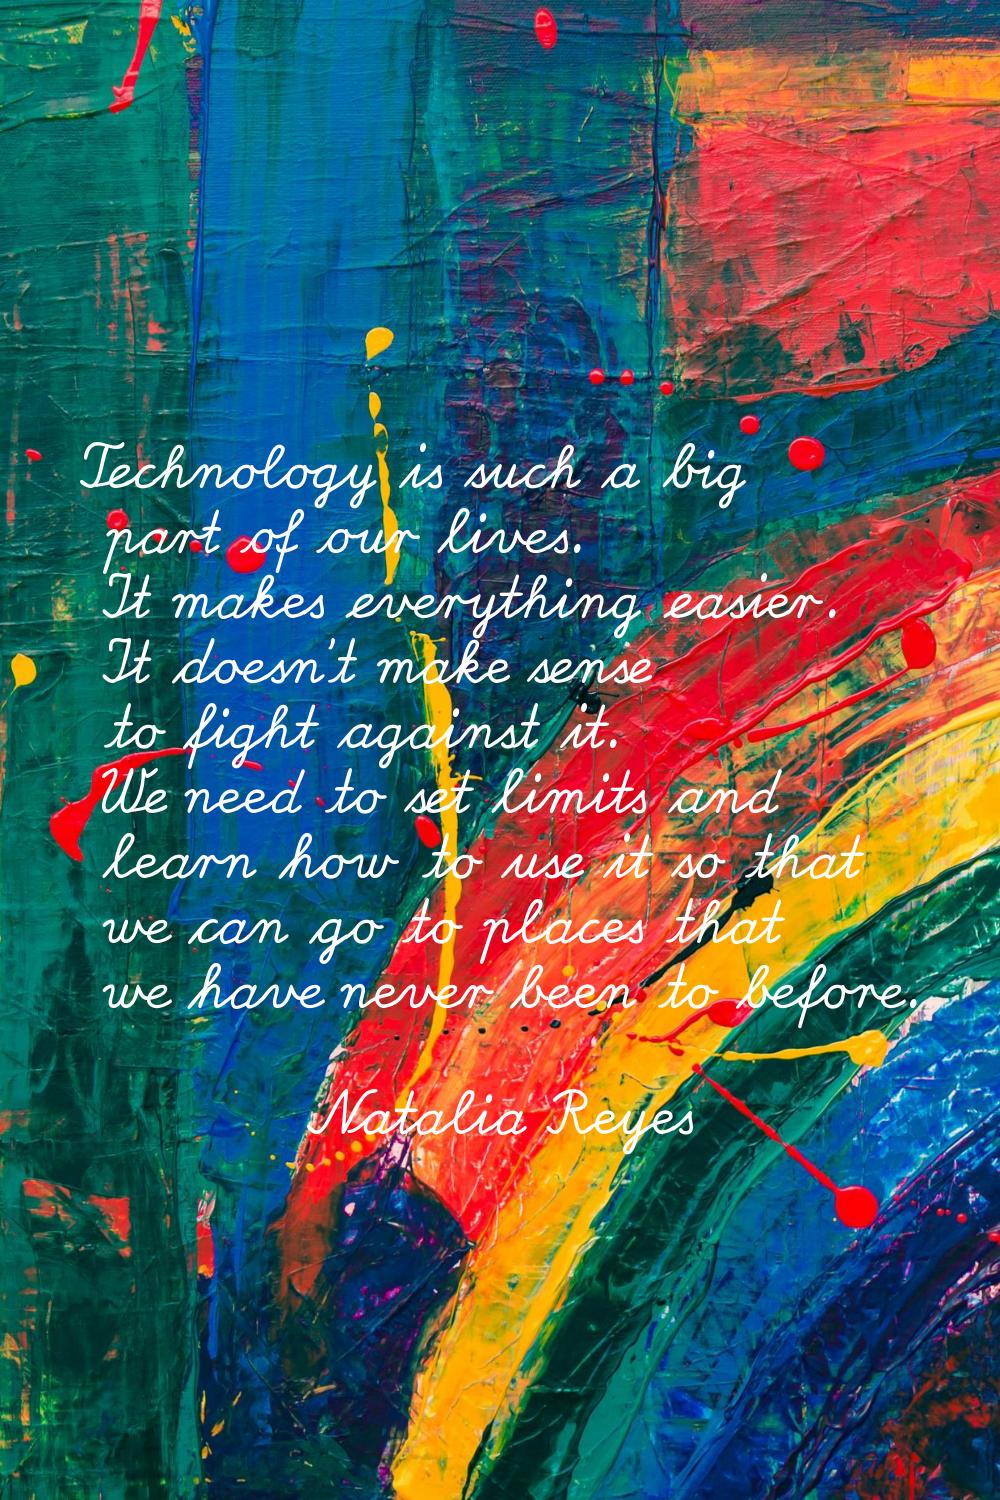 Technology is such a big part of our lives. It makes everything easier. It doesn’t make sense to fi